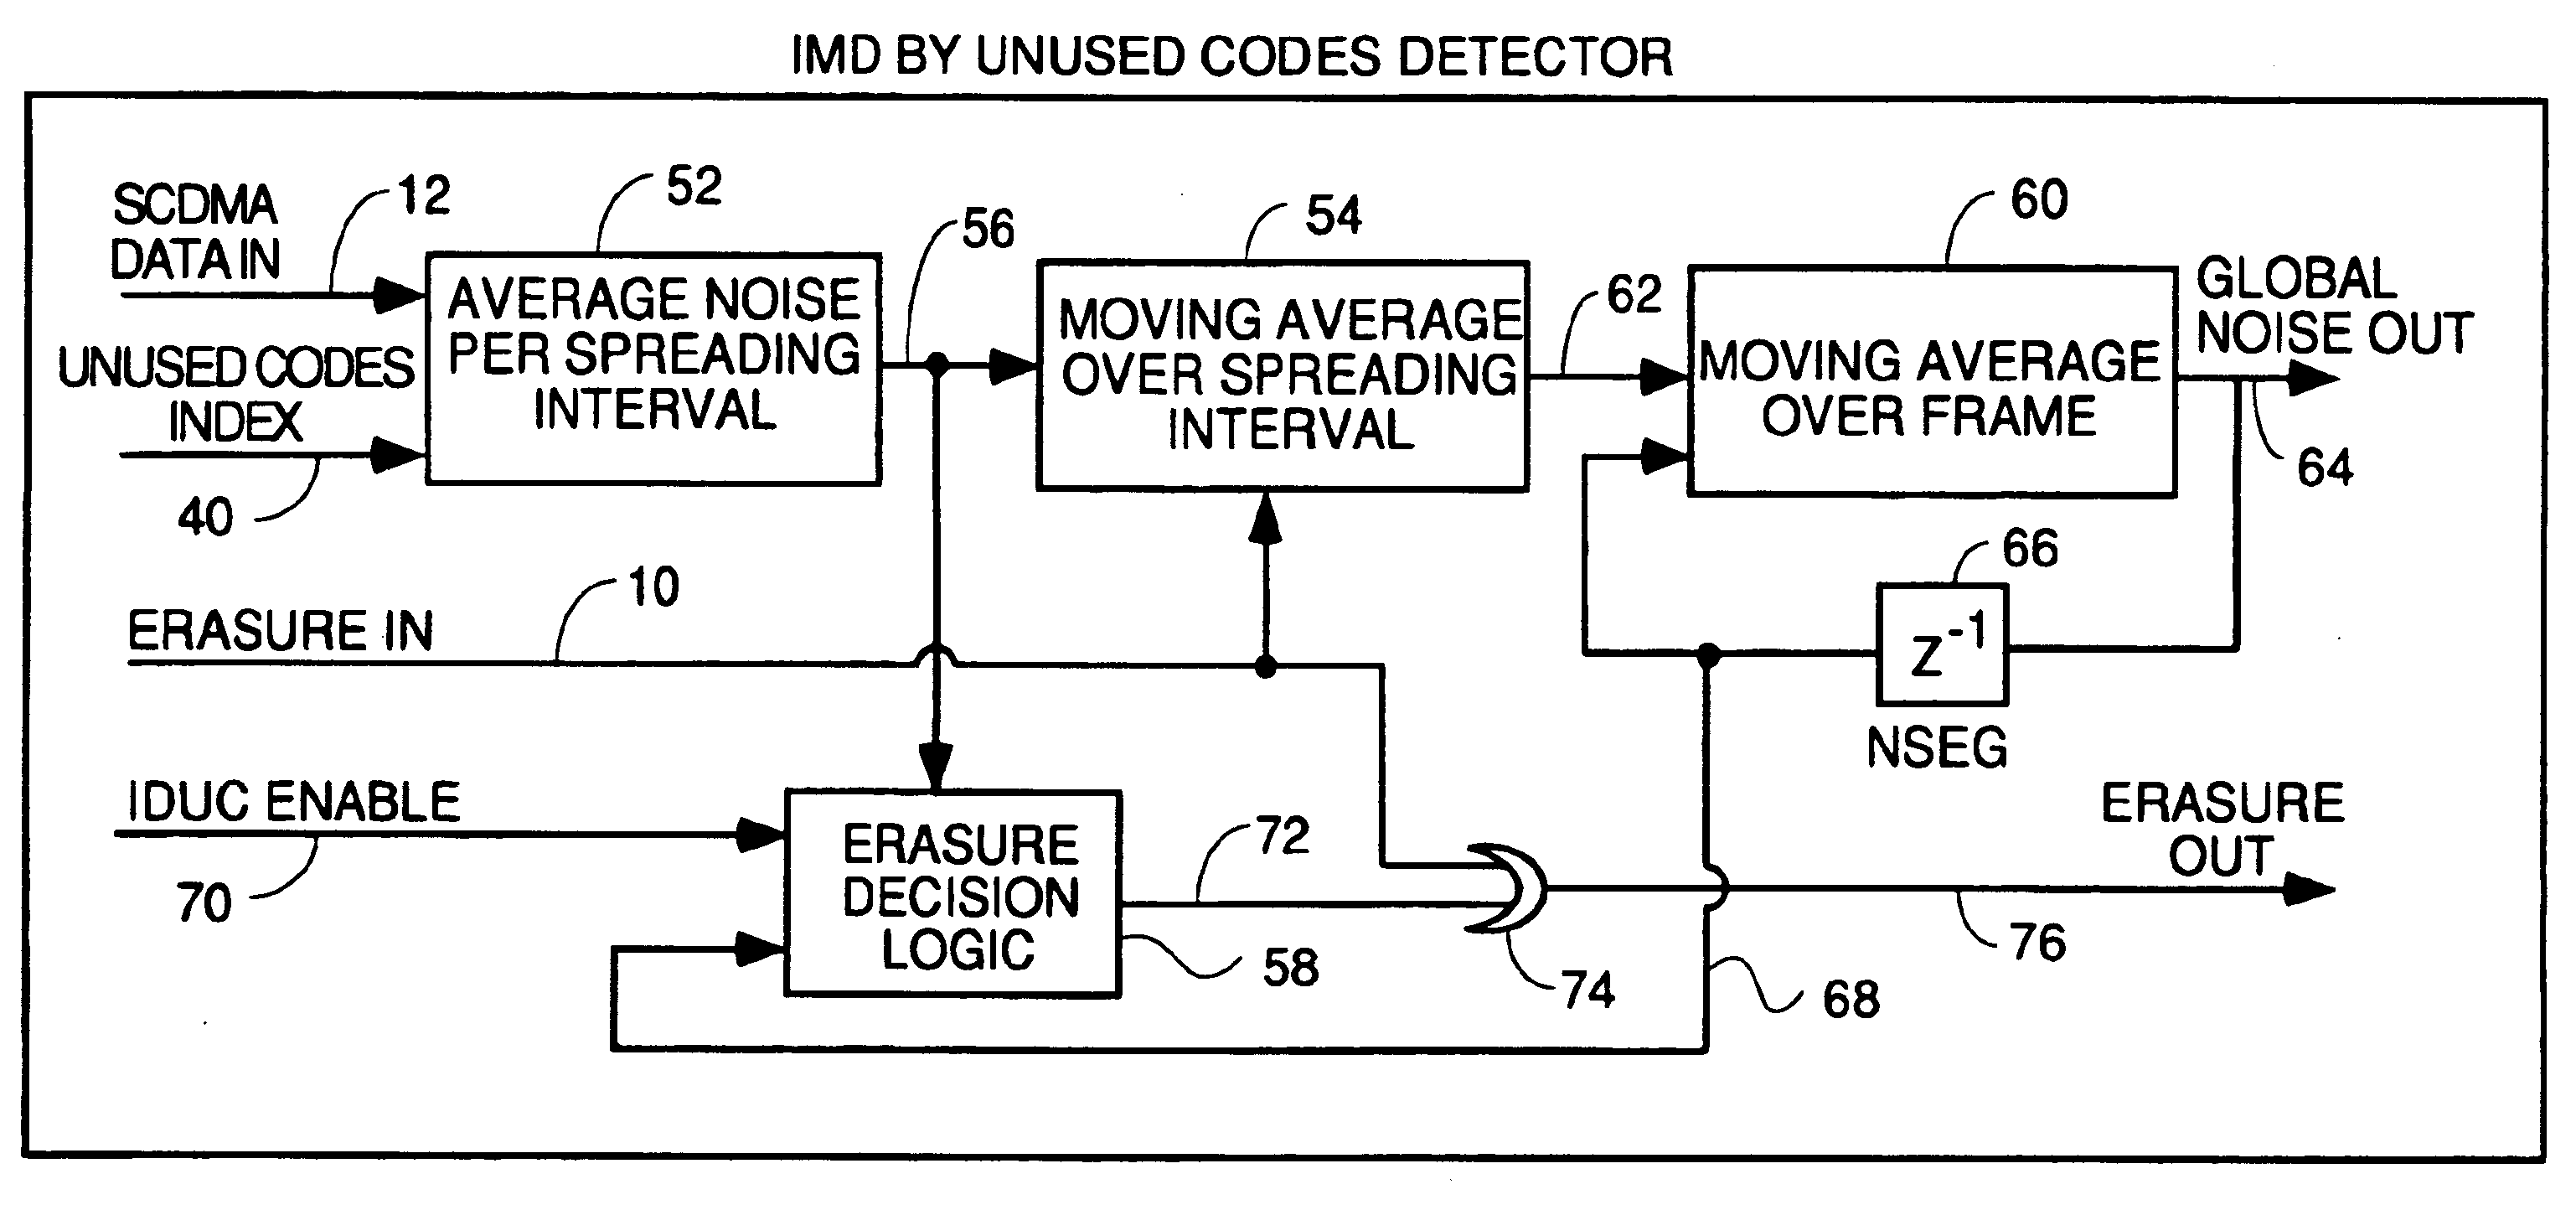 Detection of impulse noise using unused codes in CDMA systems